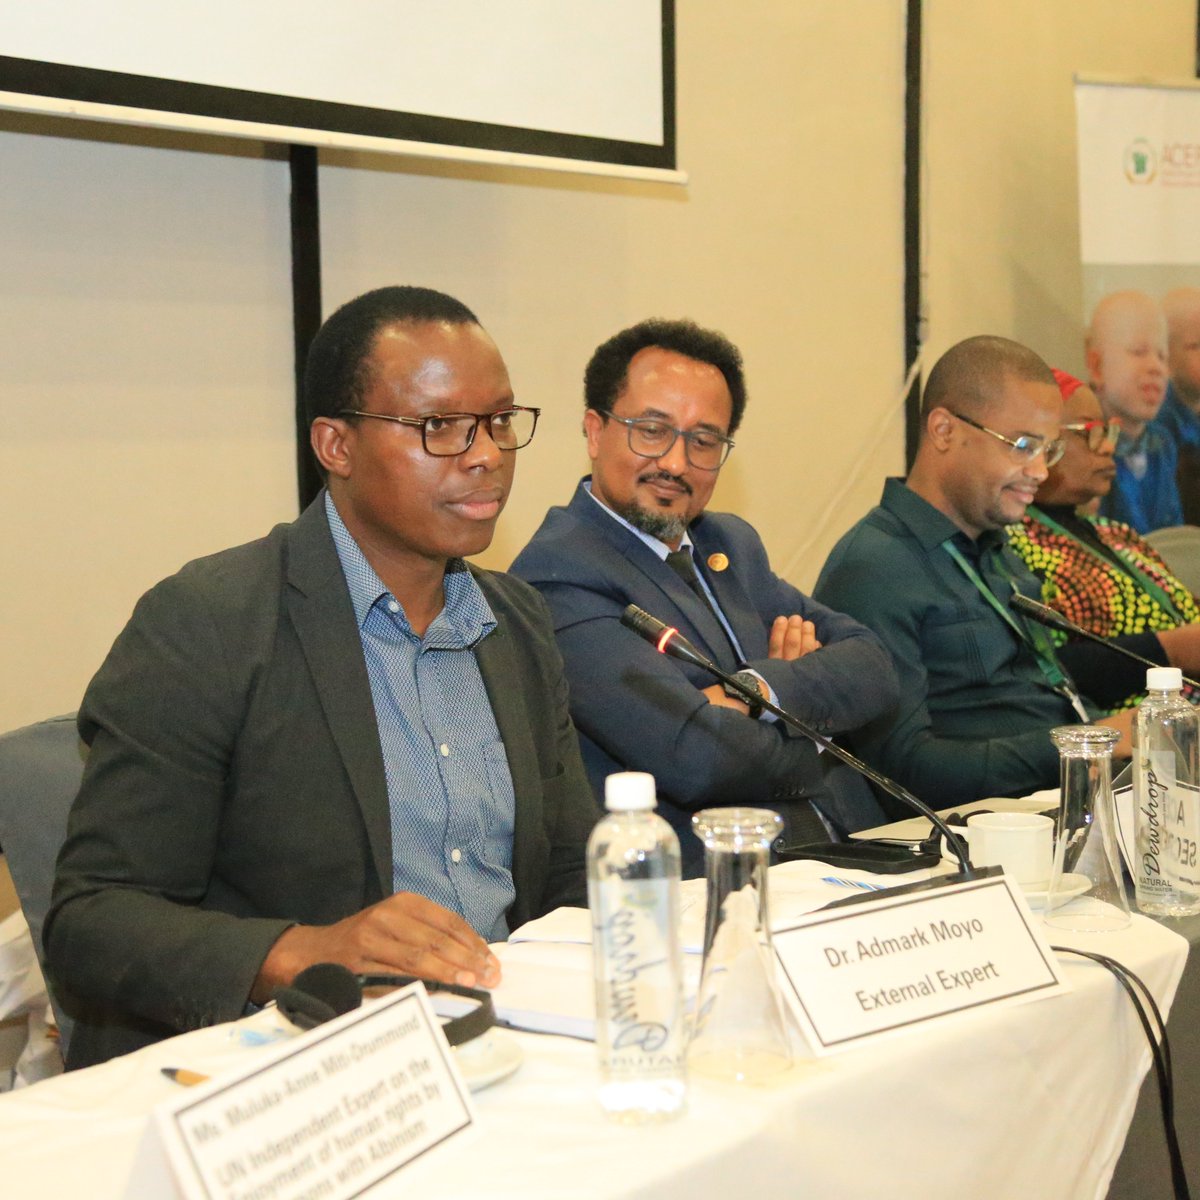 Day of General Discussion: Panel III: Reviewing protections for children with albinism under regional and international human rights instrument. This panel is moderated by Dr. Admark Moyo, External Expert of the Working Group on the Rights of Children with Disabilities.